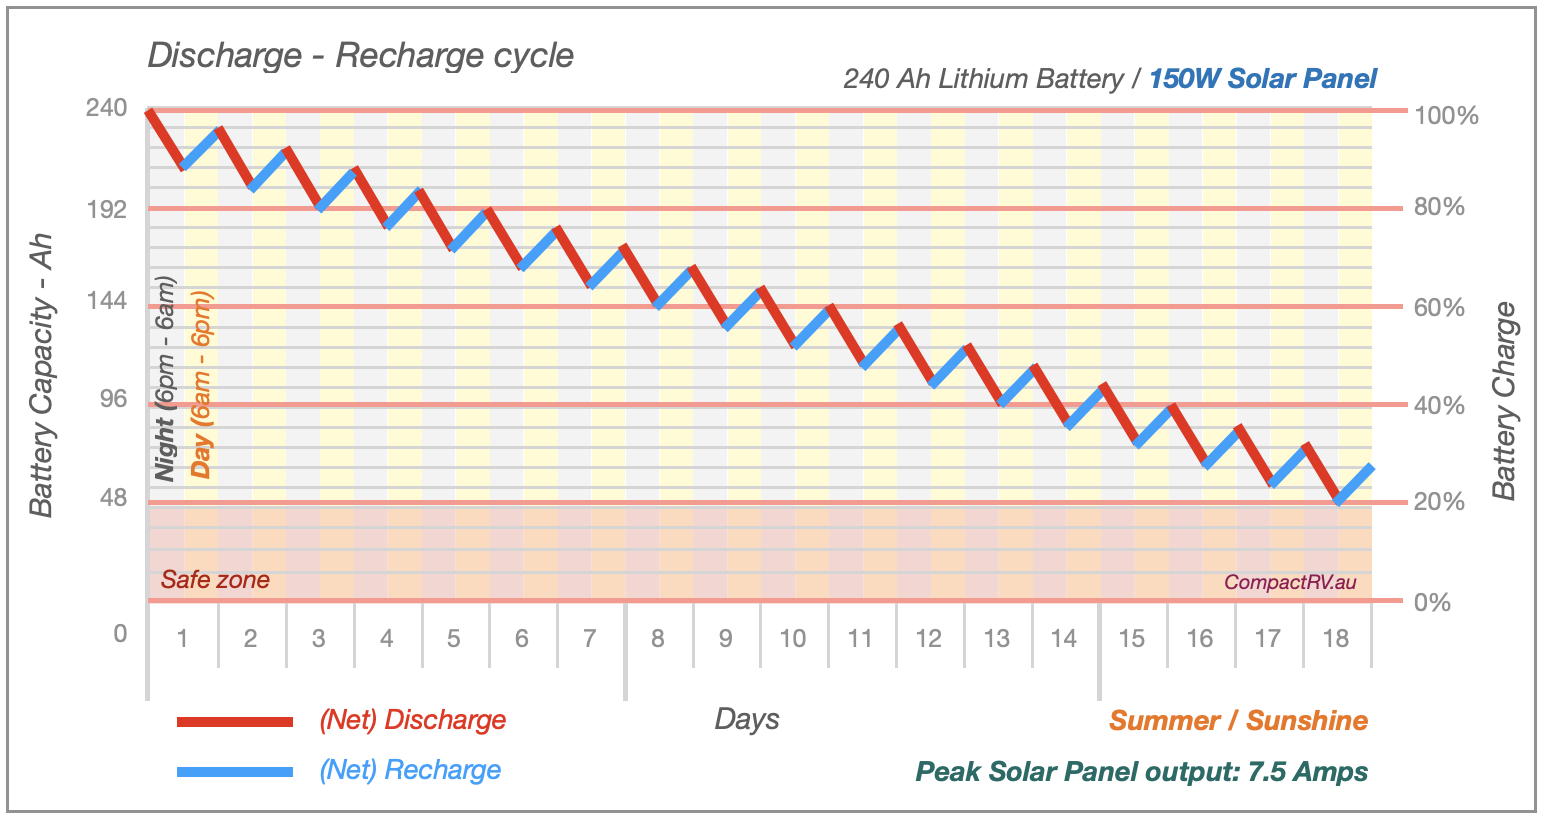 Discharge recharge graph with 150W panel